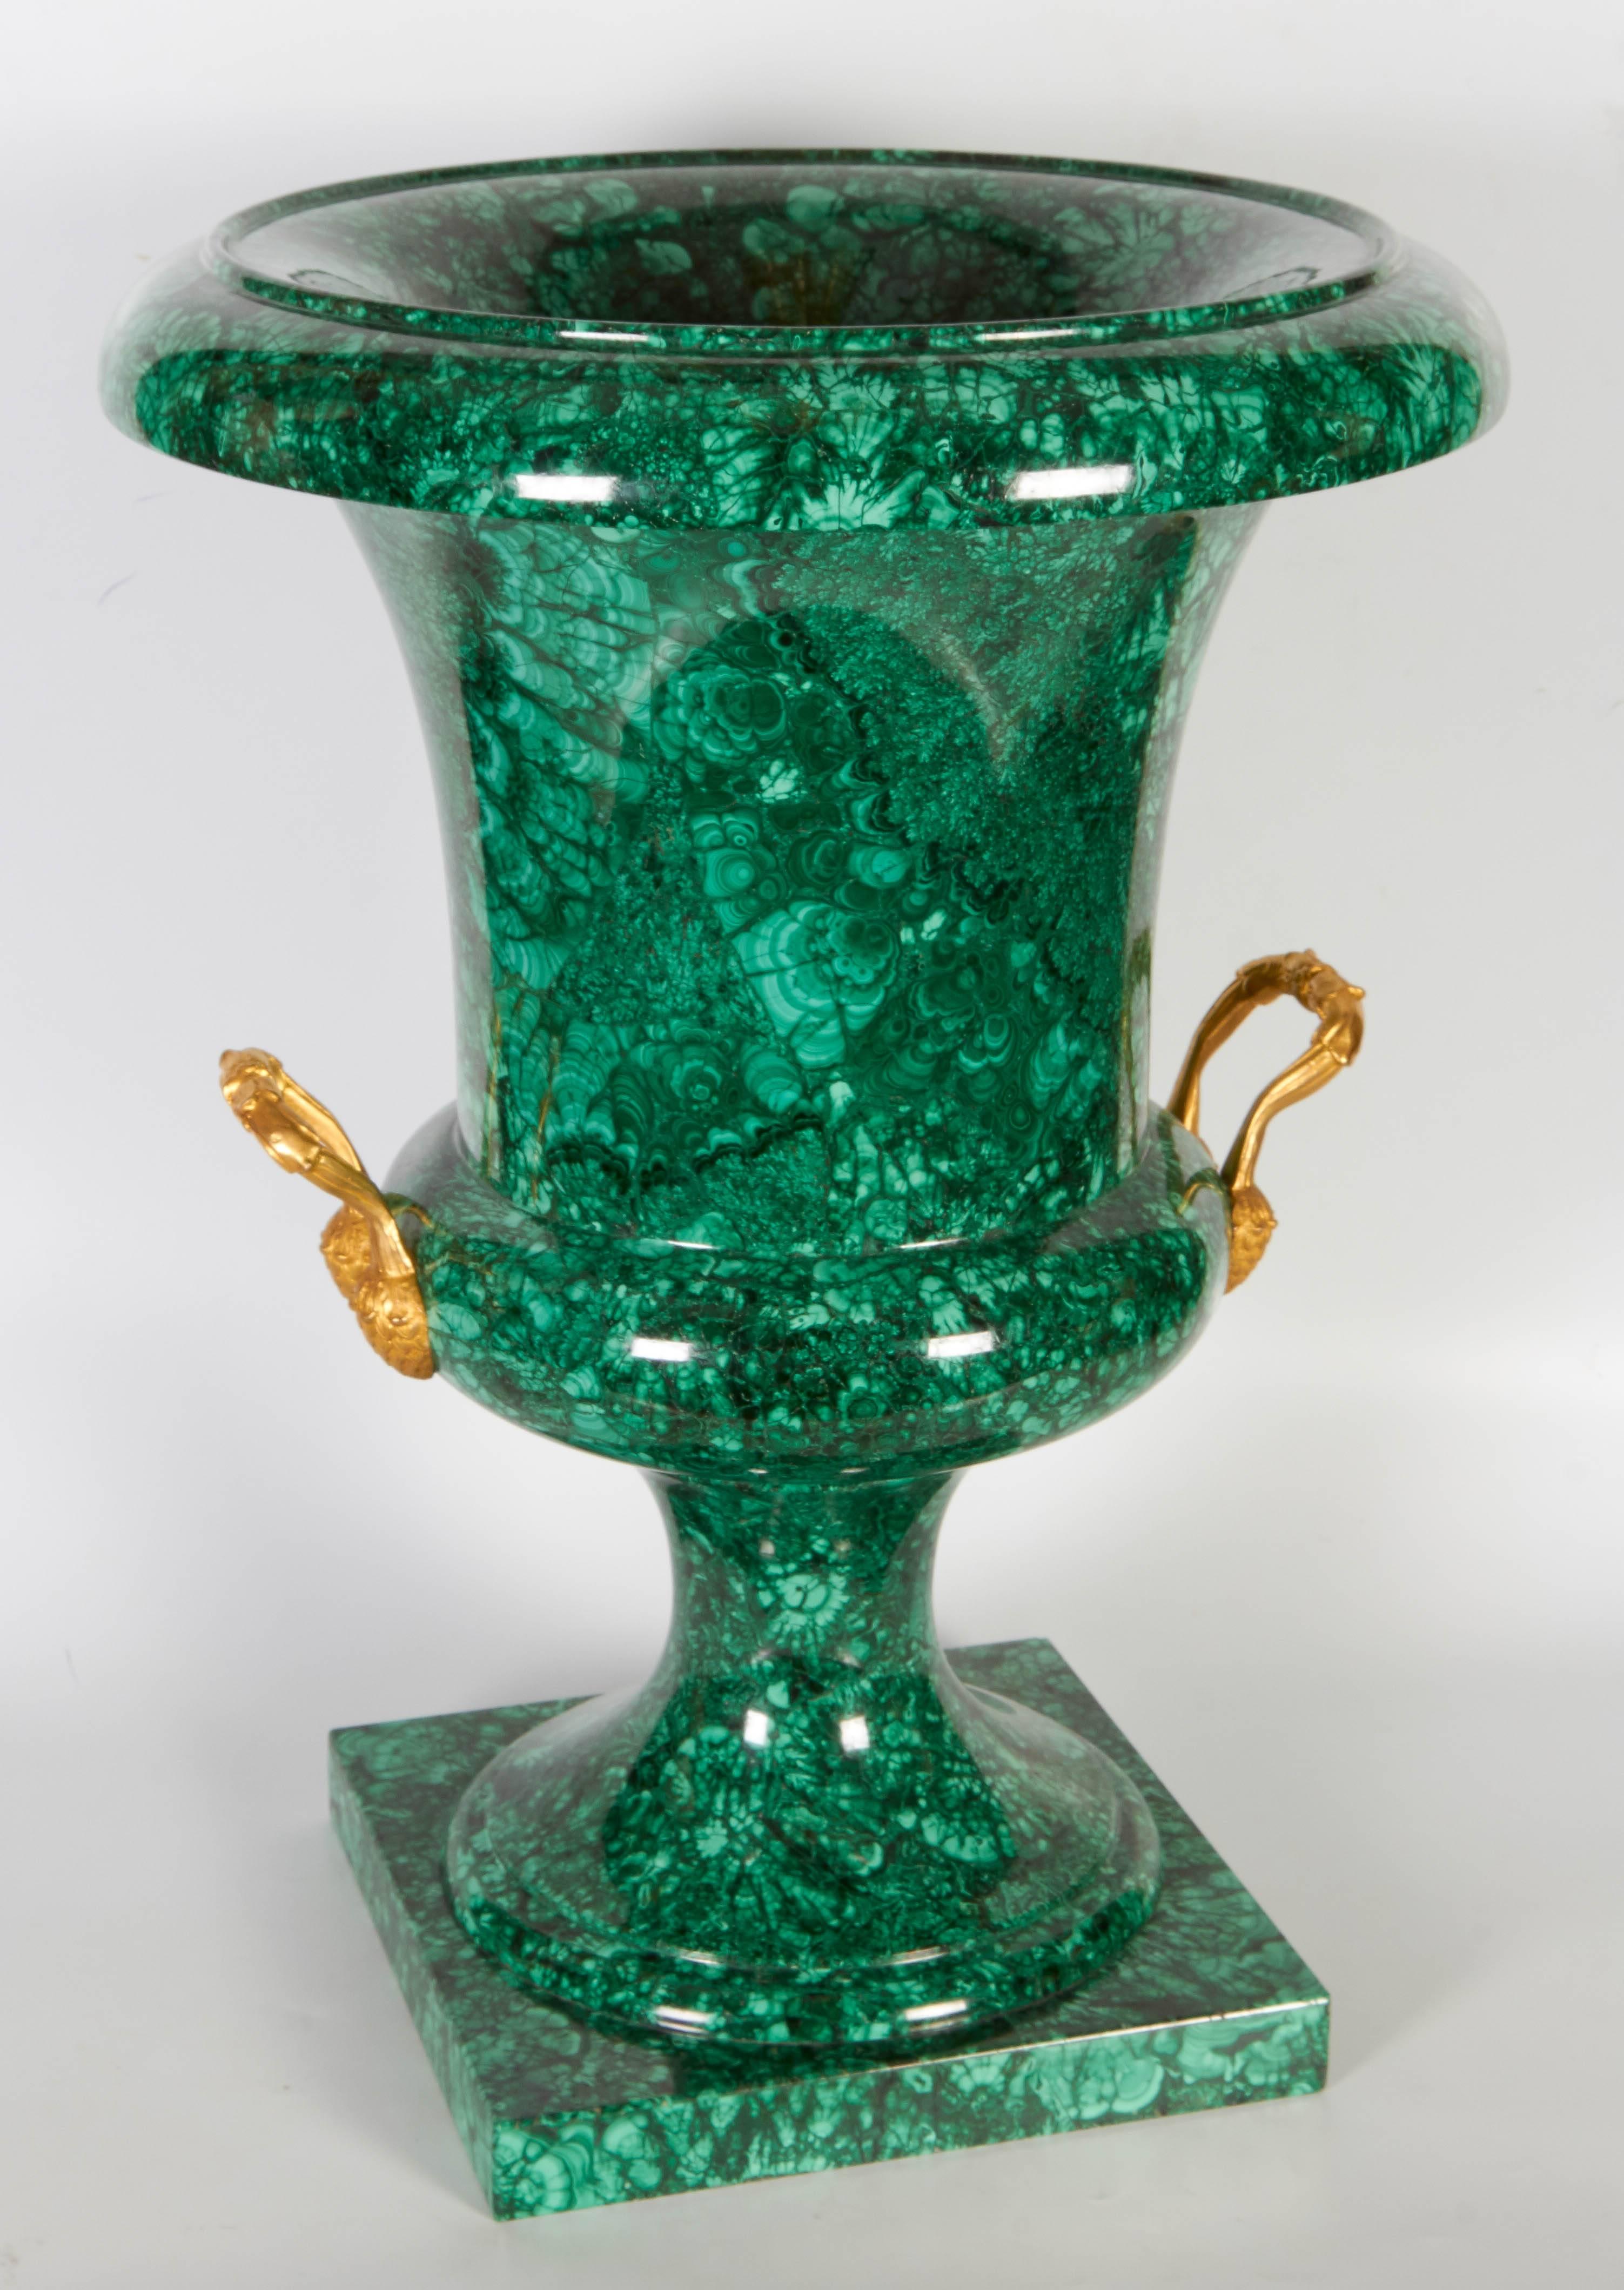 A large Russian neoclassical malachite, Campana shaped urn or Vase, the ormolu twin handles modeled with acorns, on a circular spreading foot with square stepped plinth, 
19th century, Russian, most probably St. Petersburg.

Measures: Height: 21